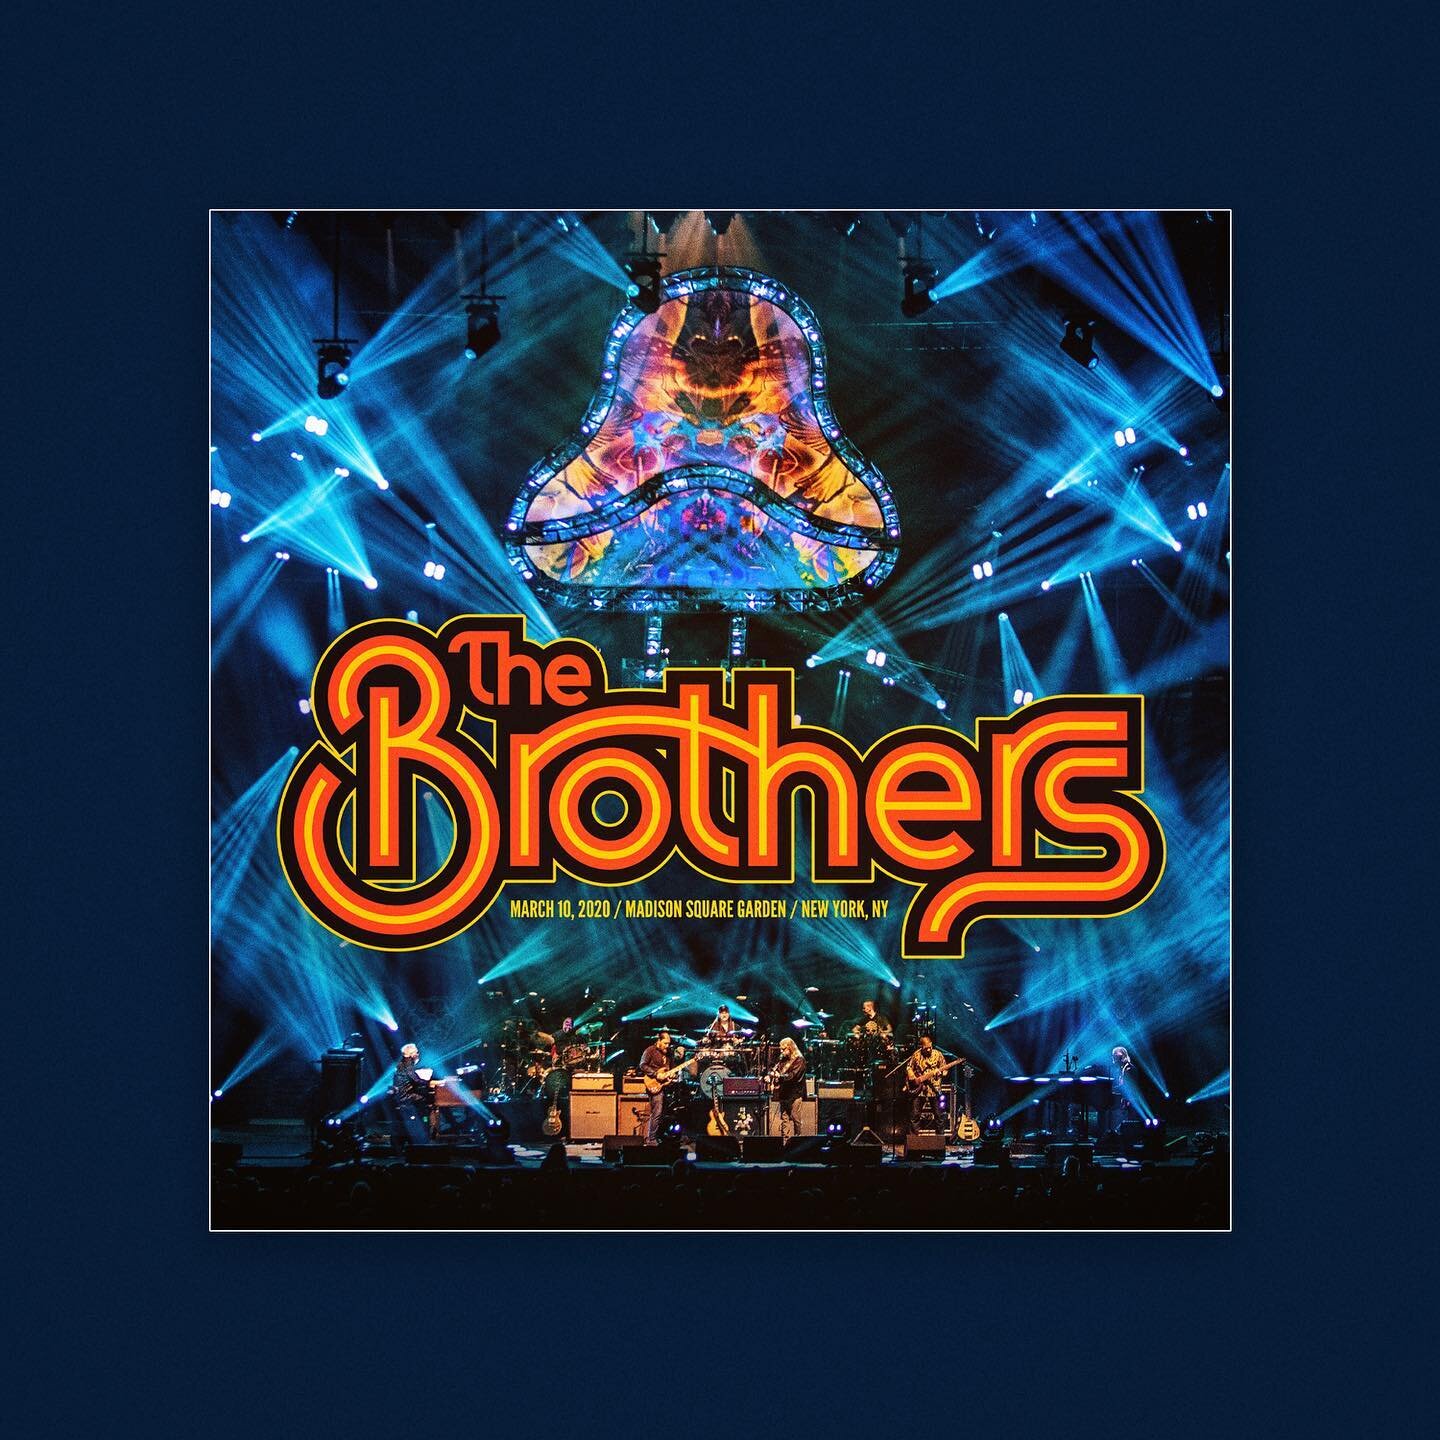 The official CD, DVD and Blu-Ray for #thebrothers50 drops this Friday! Head to @thebighousemuseum and order your copy today. I&rsquo;m planning to do a more thorough share of the album packaging later this week so keep your eyes peeled for that in a 